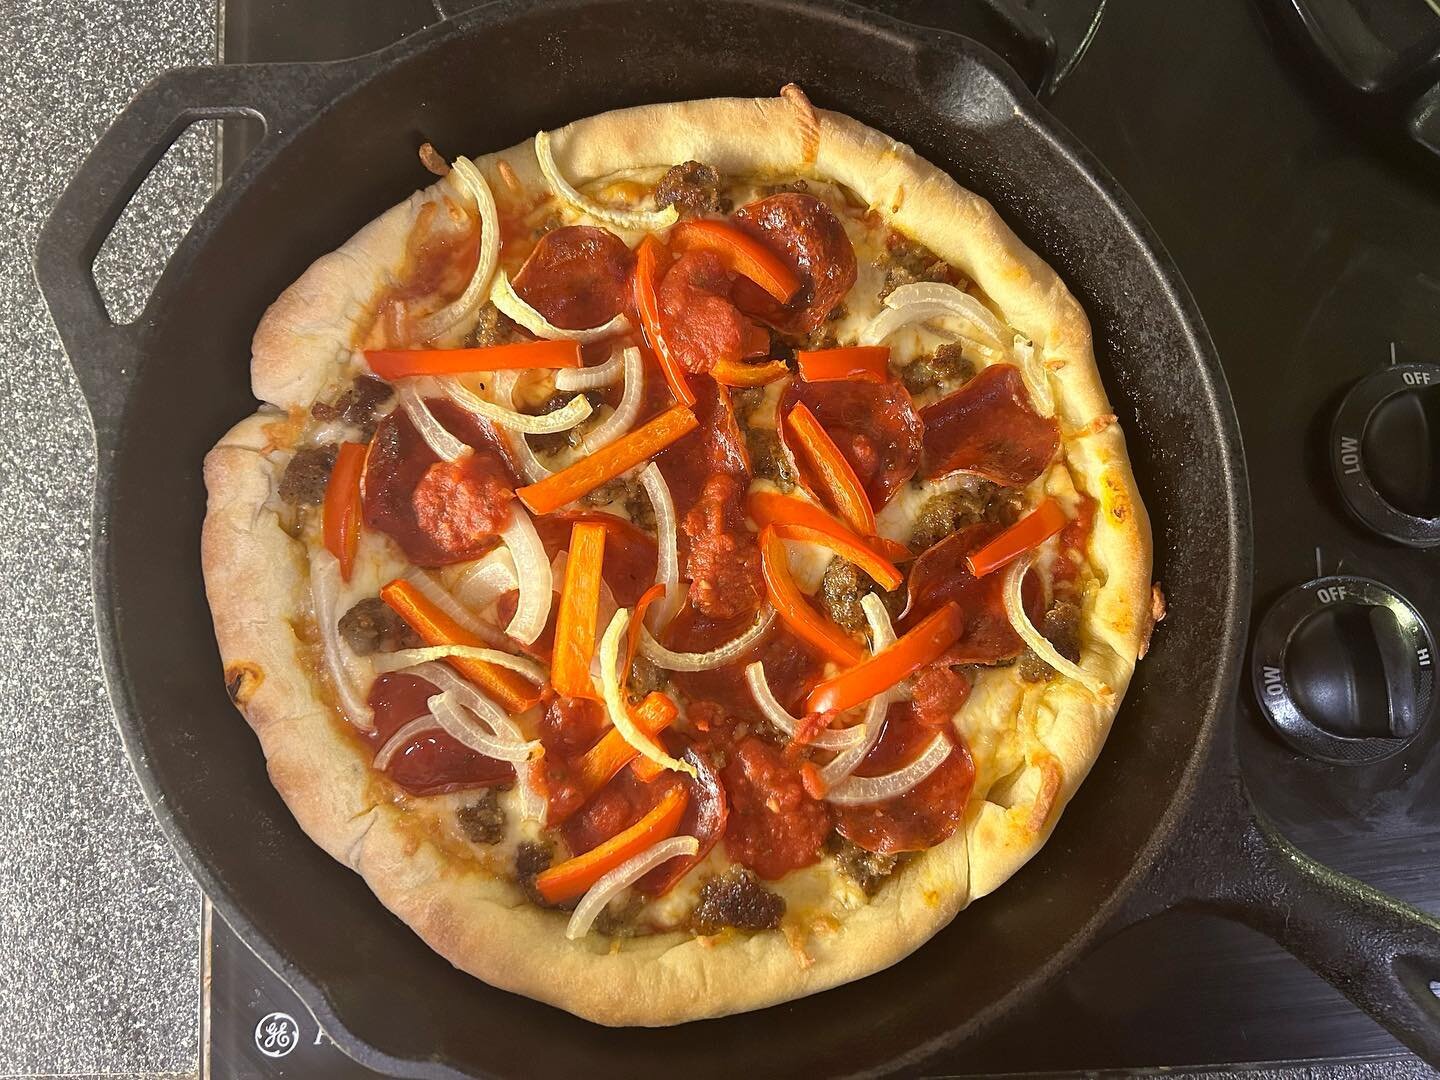 Trying a new way to pizza tonight. 

#pizza #castiron @lodgecastiron #lovemylodgecastiron #eatingwellontinkerbell